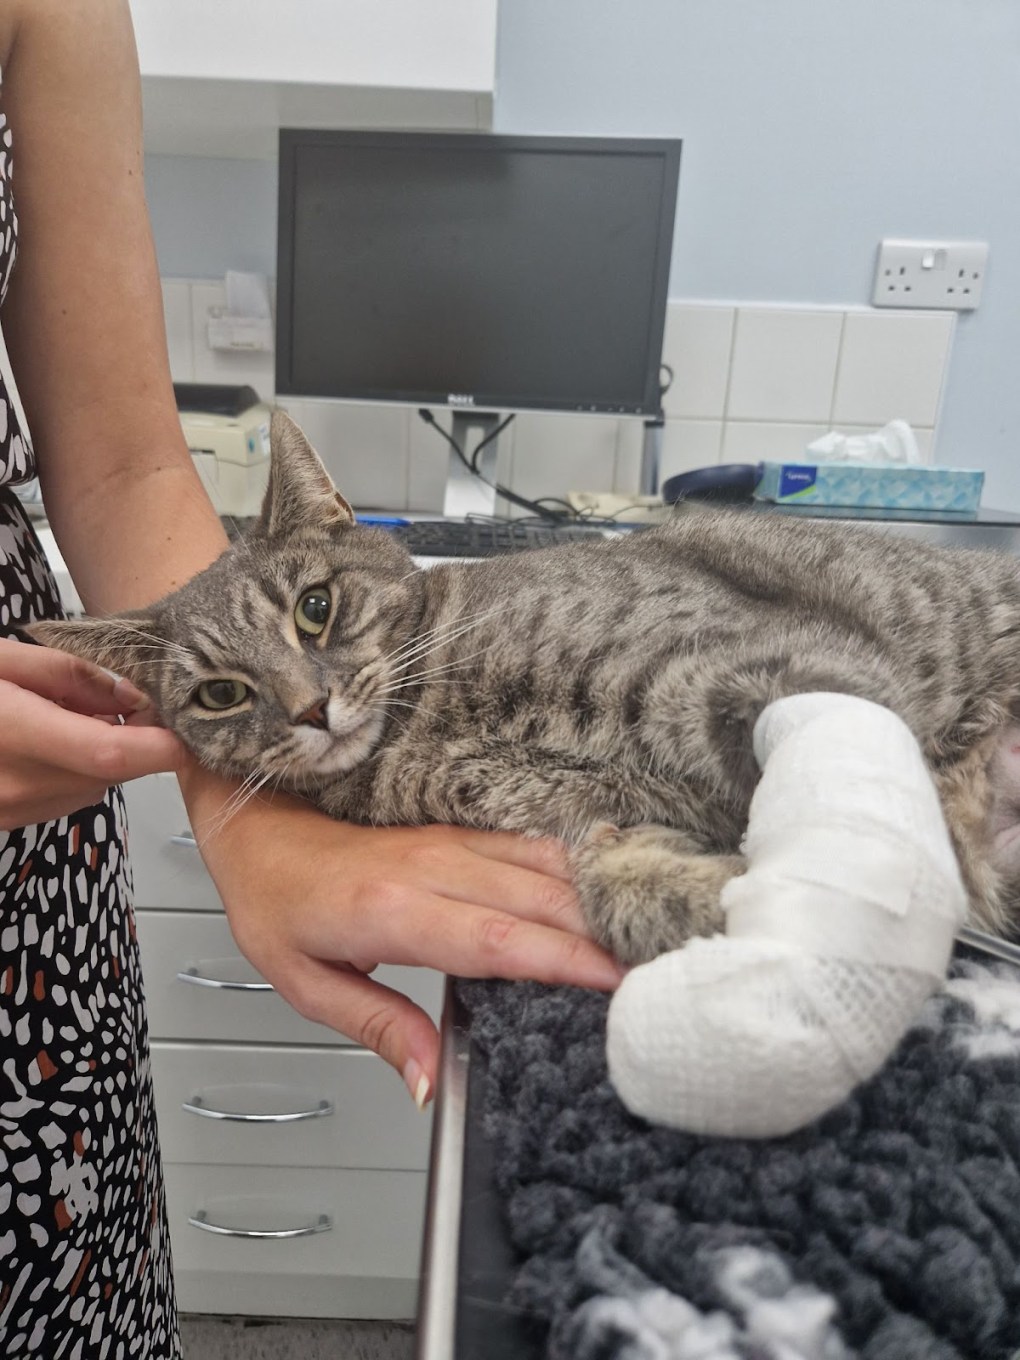 RSPCA Probes Series of Mystery Air Rifle Shootings of Cats in Hornchurch, Essex